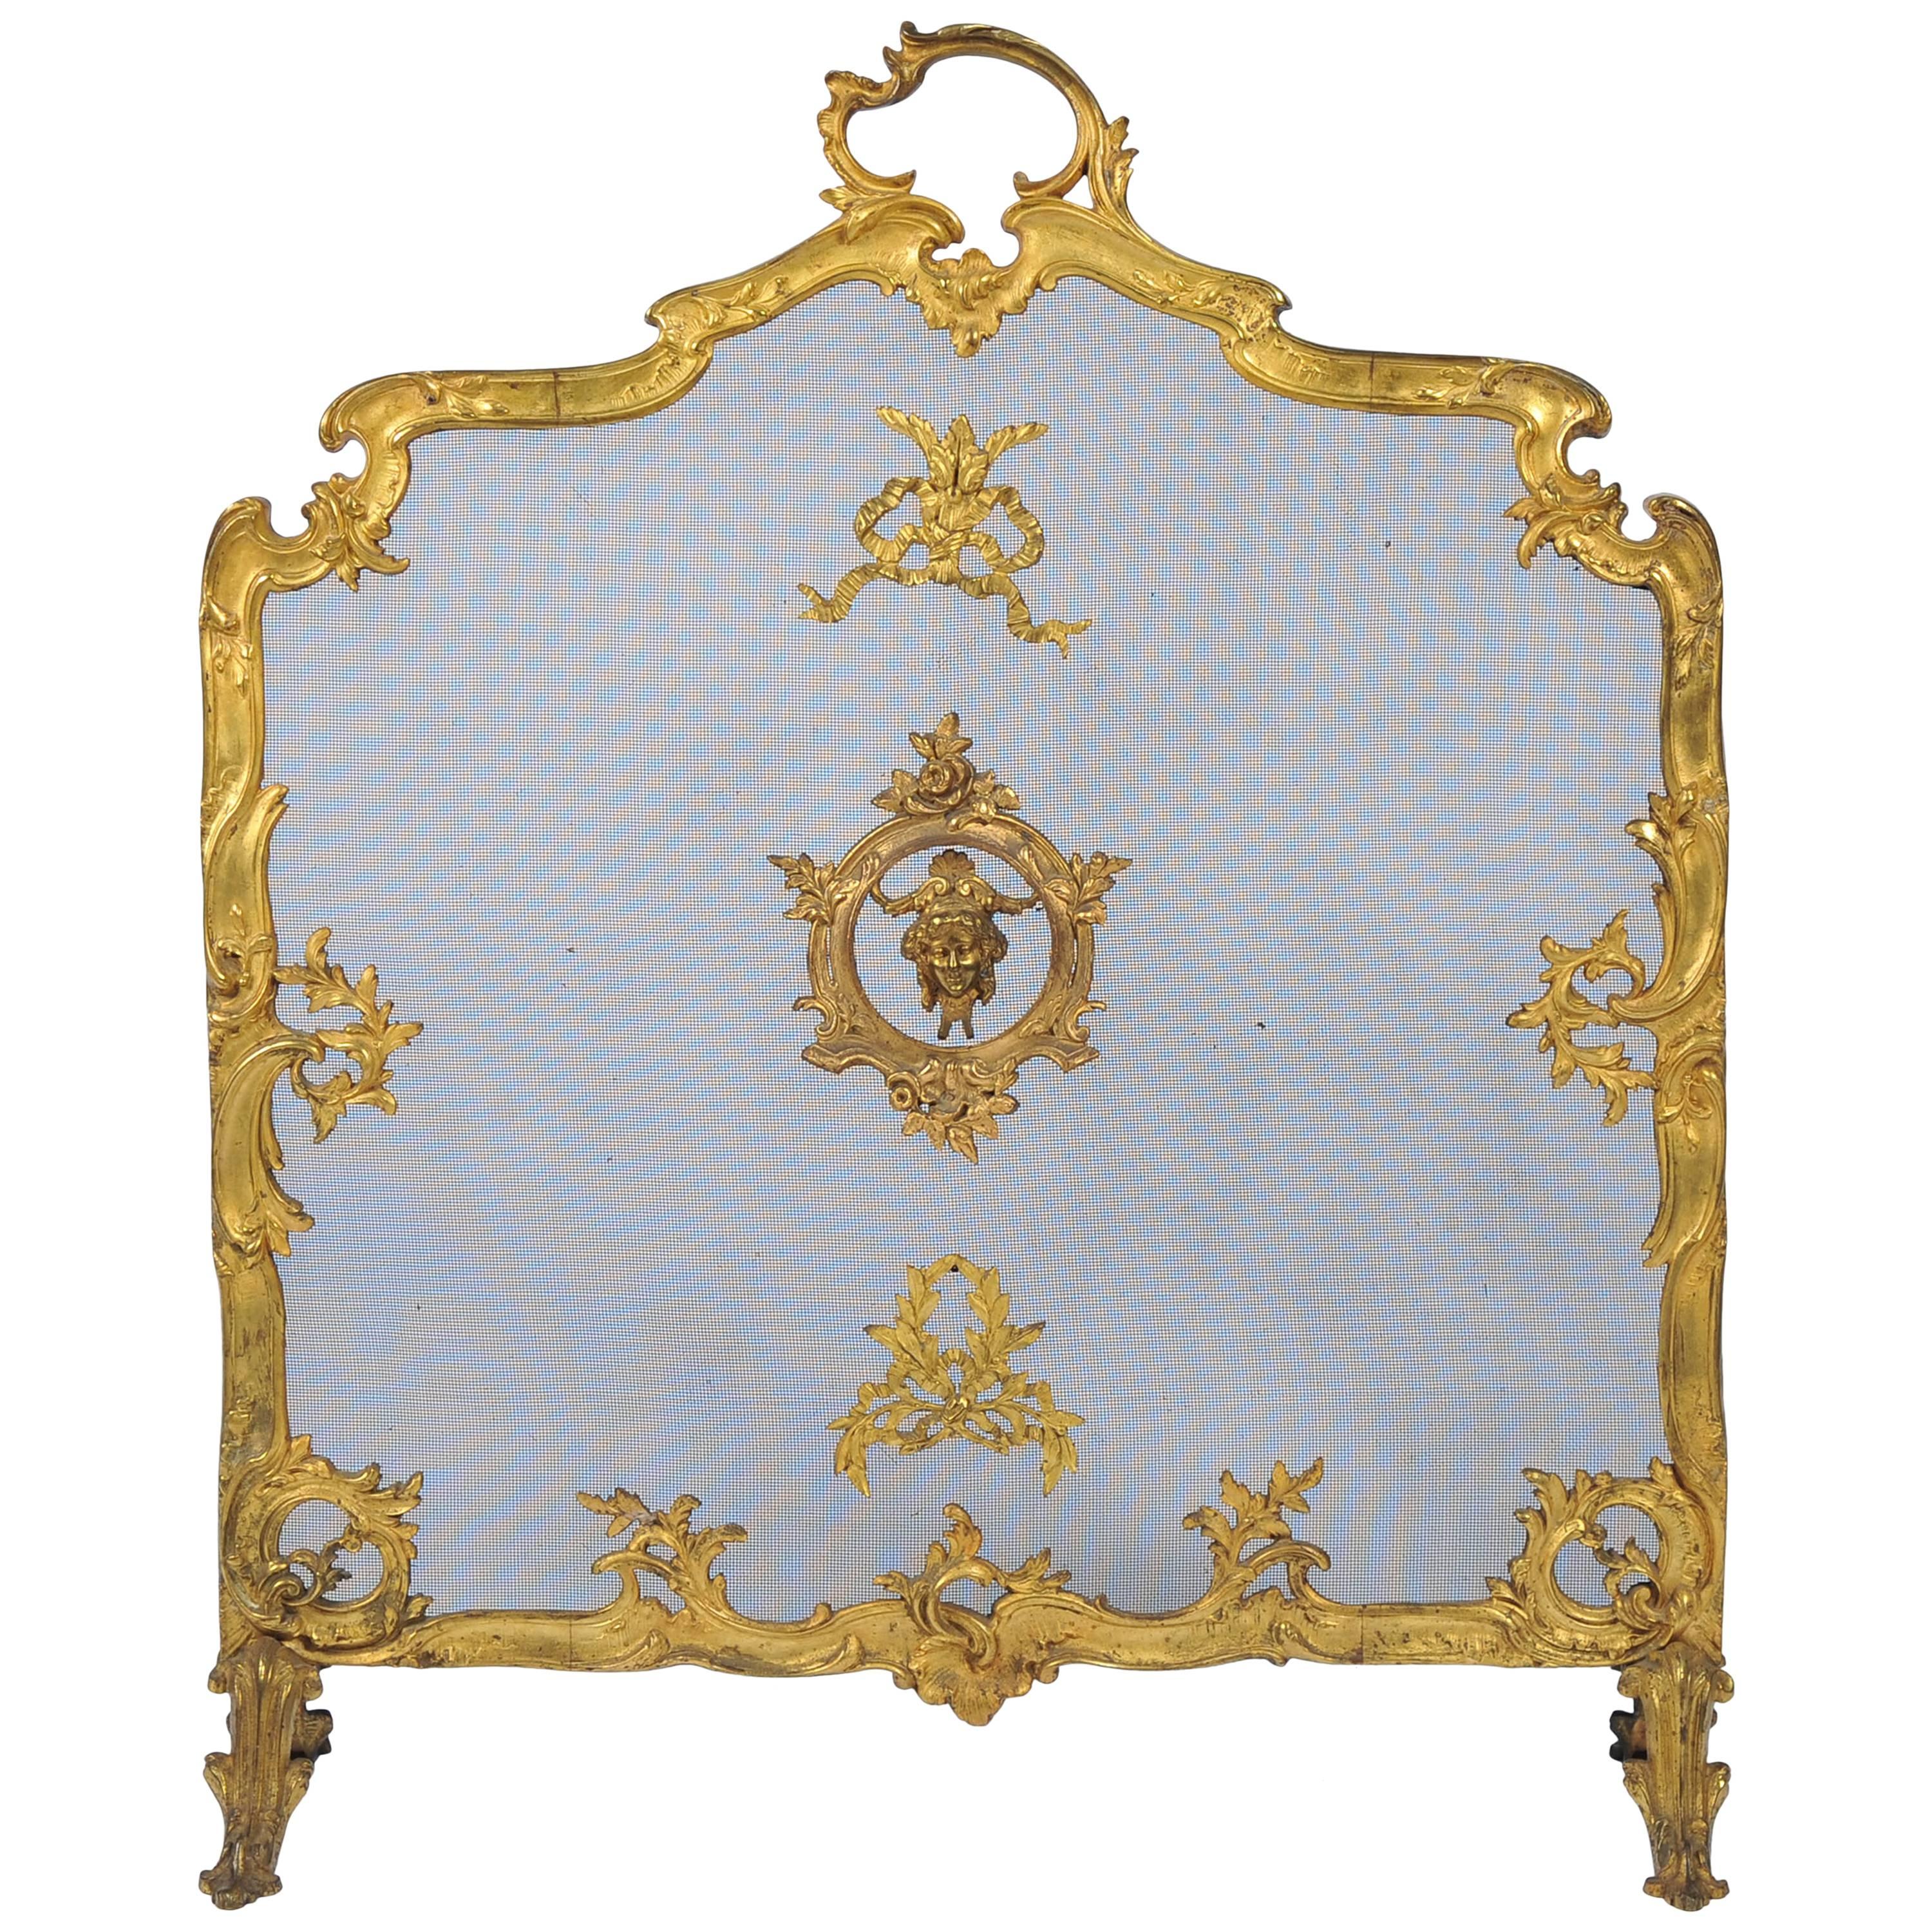 Antique French Fire Screen, Louis XVI Style